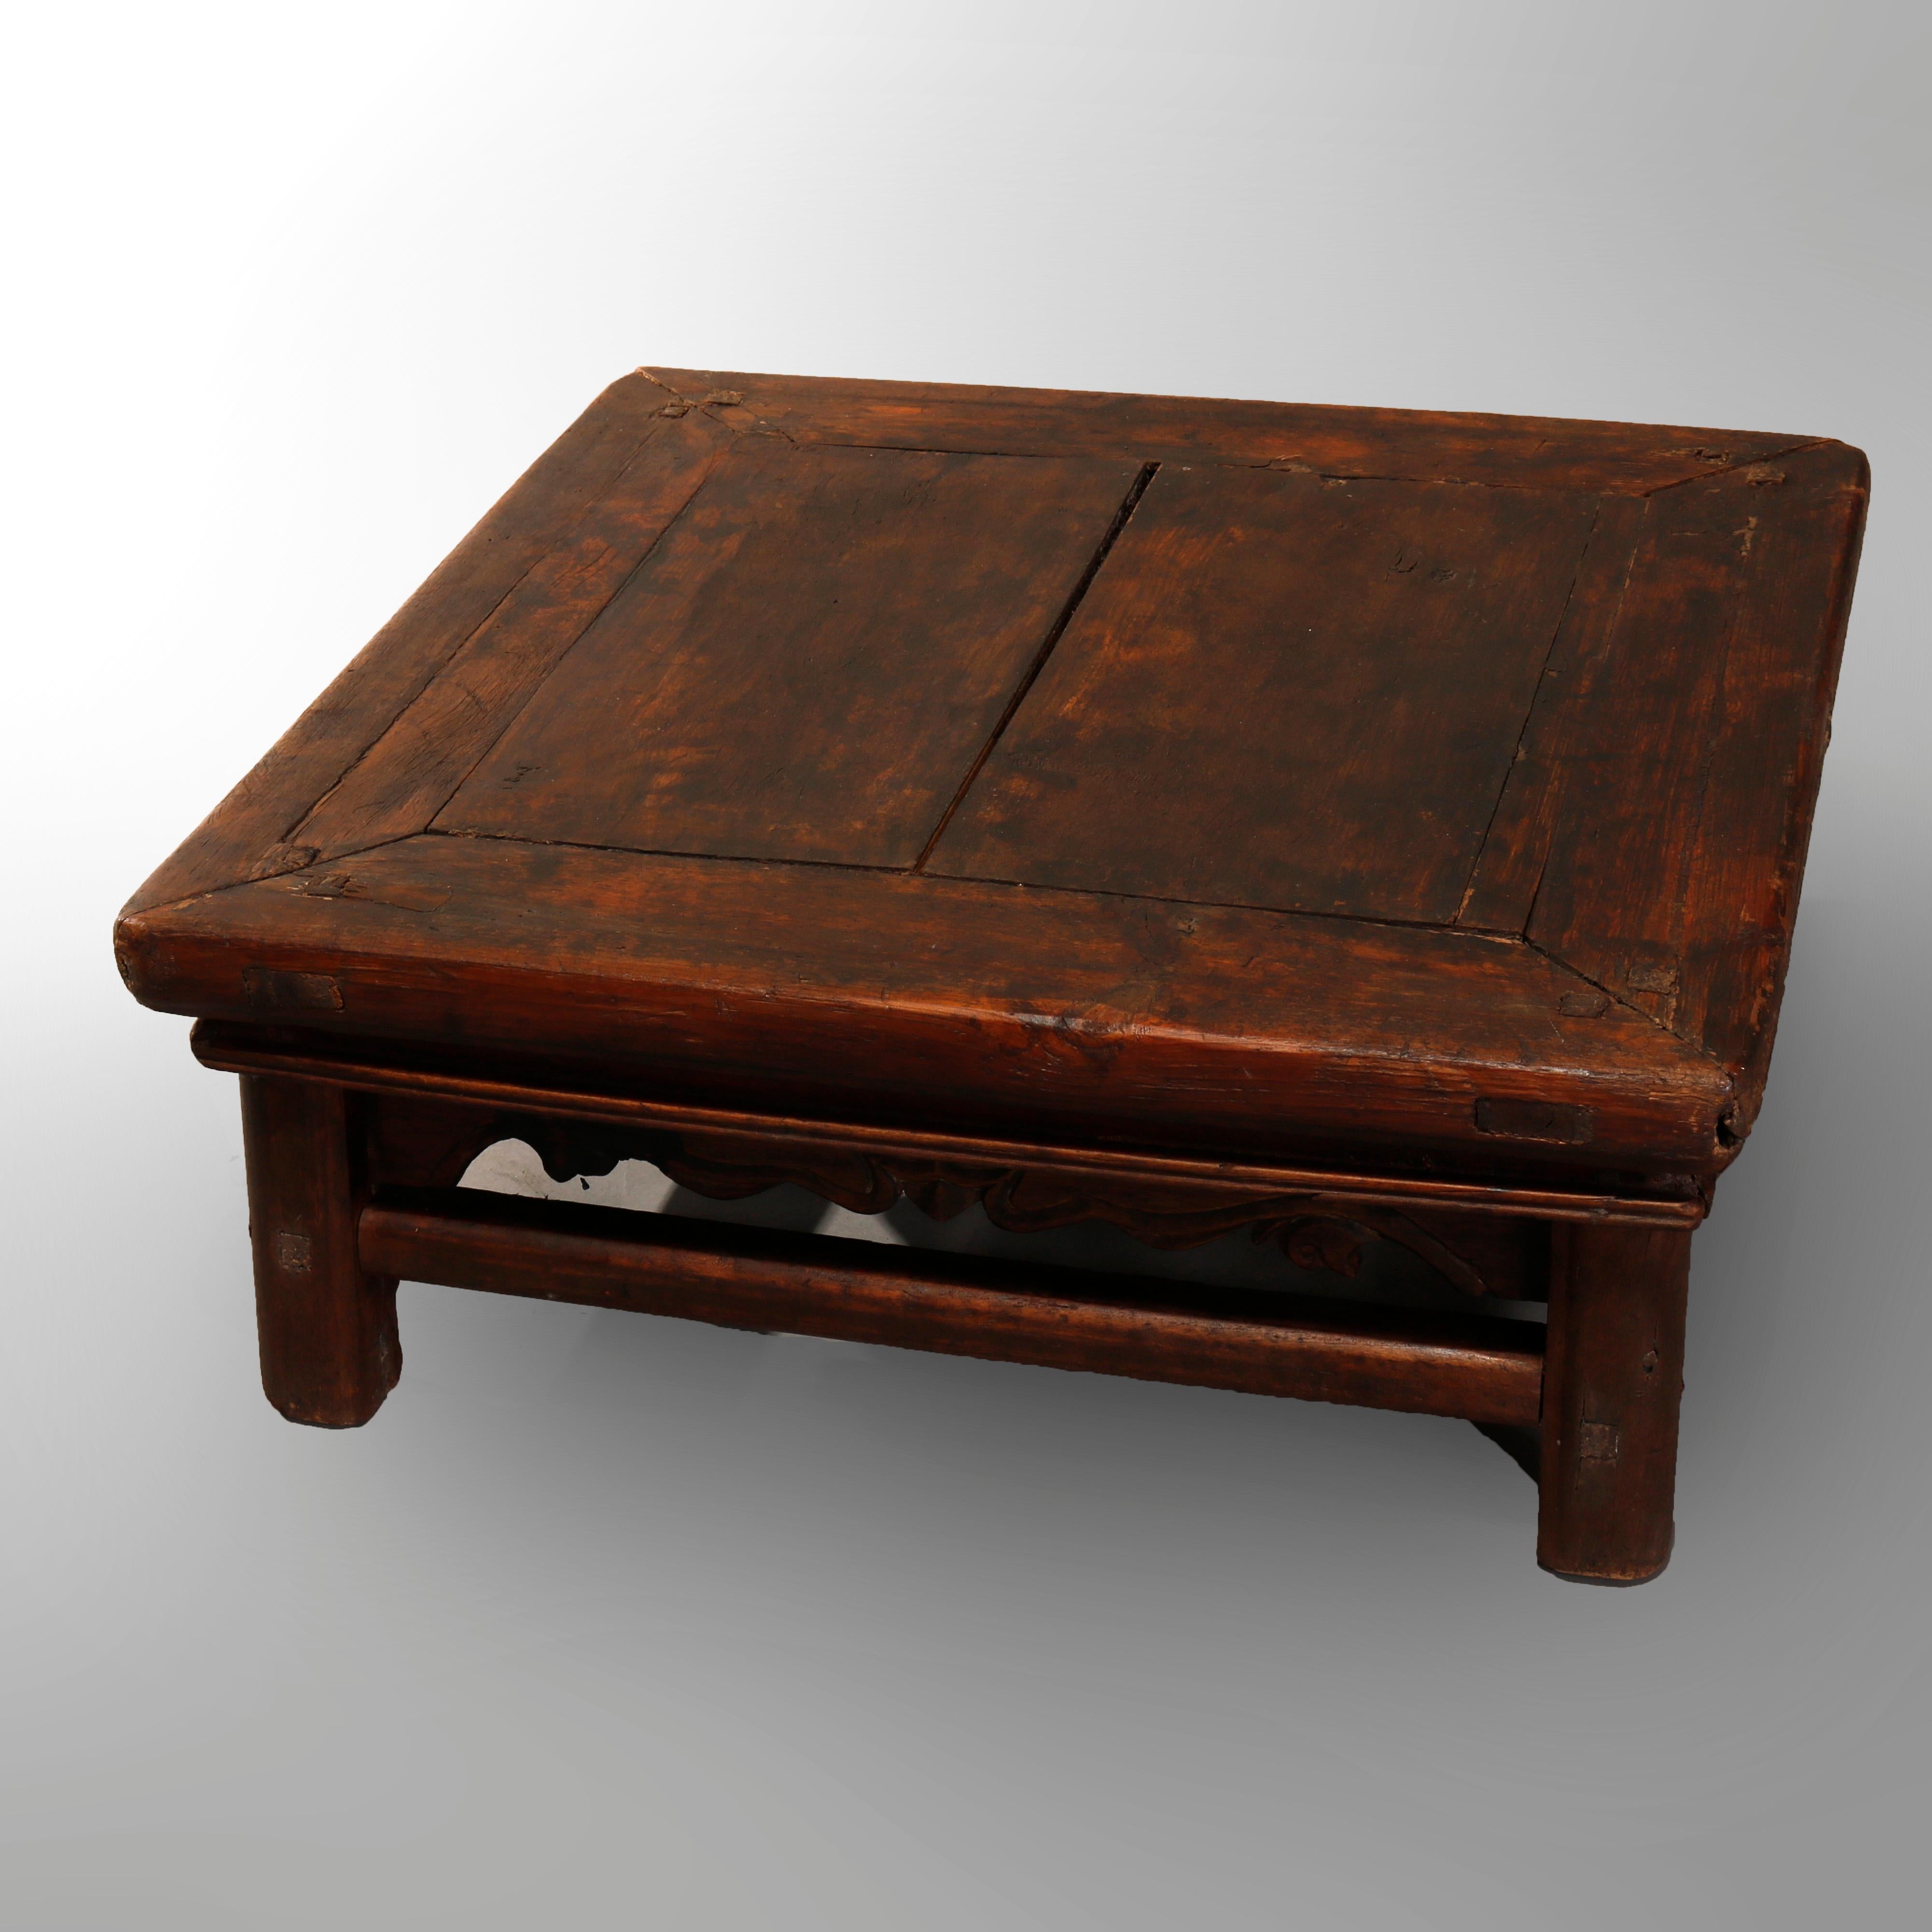 Wood Antique Chinese Carved Hardwood Low Table, 19th Century